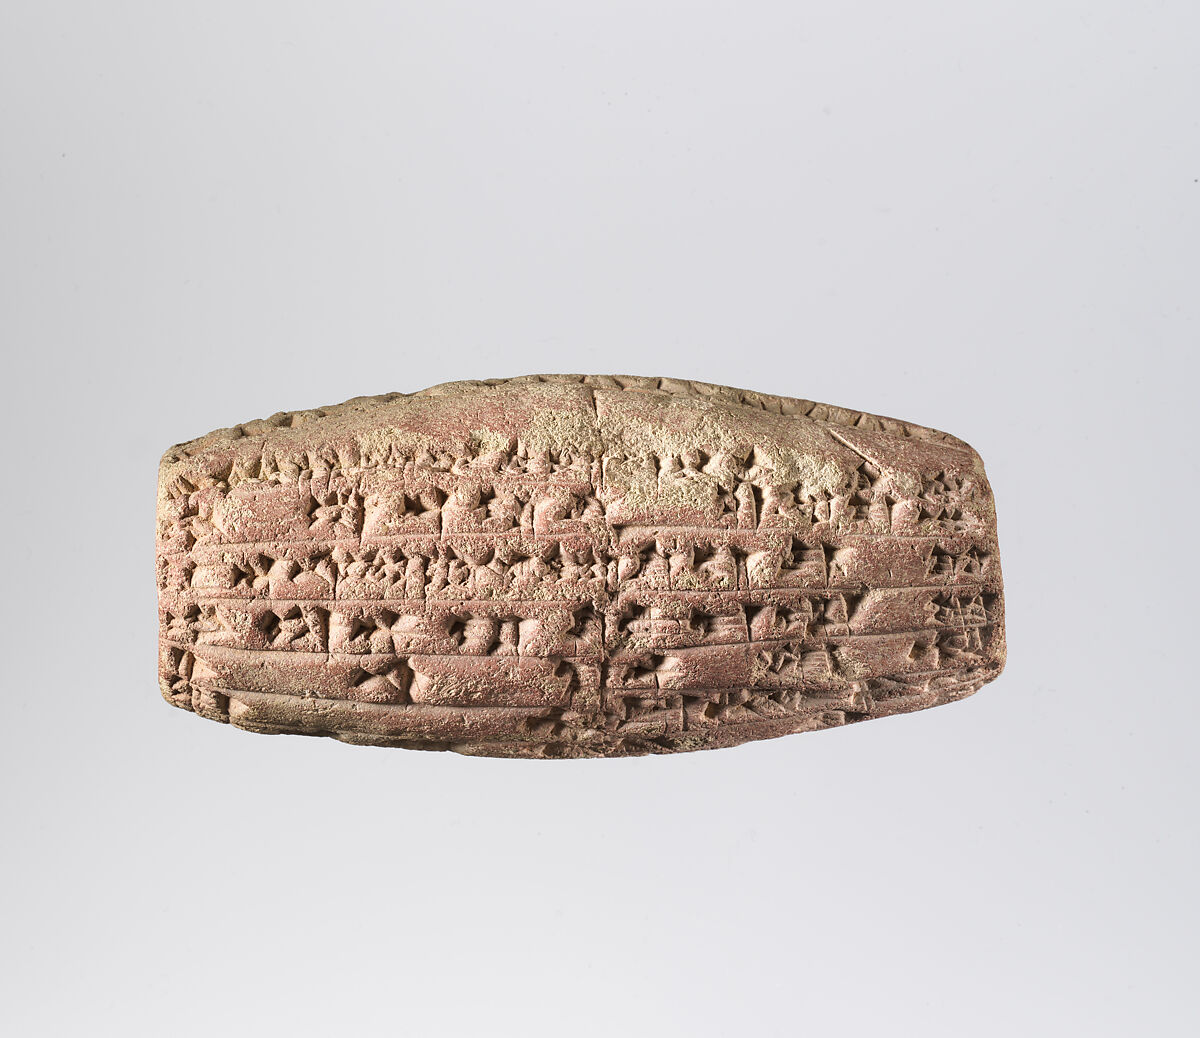 Cuneiform cylinder with inscription of Nebuchadnezzar II describing the rebuilding of the temple of the mother-goddess Ninmah/Belet-ili at Babylon, Clay, Babylonian